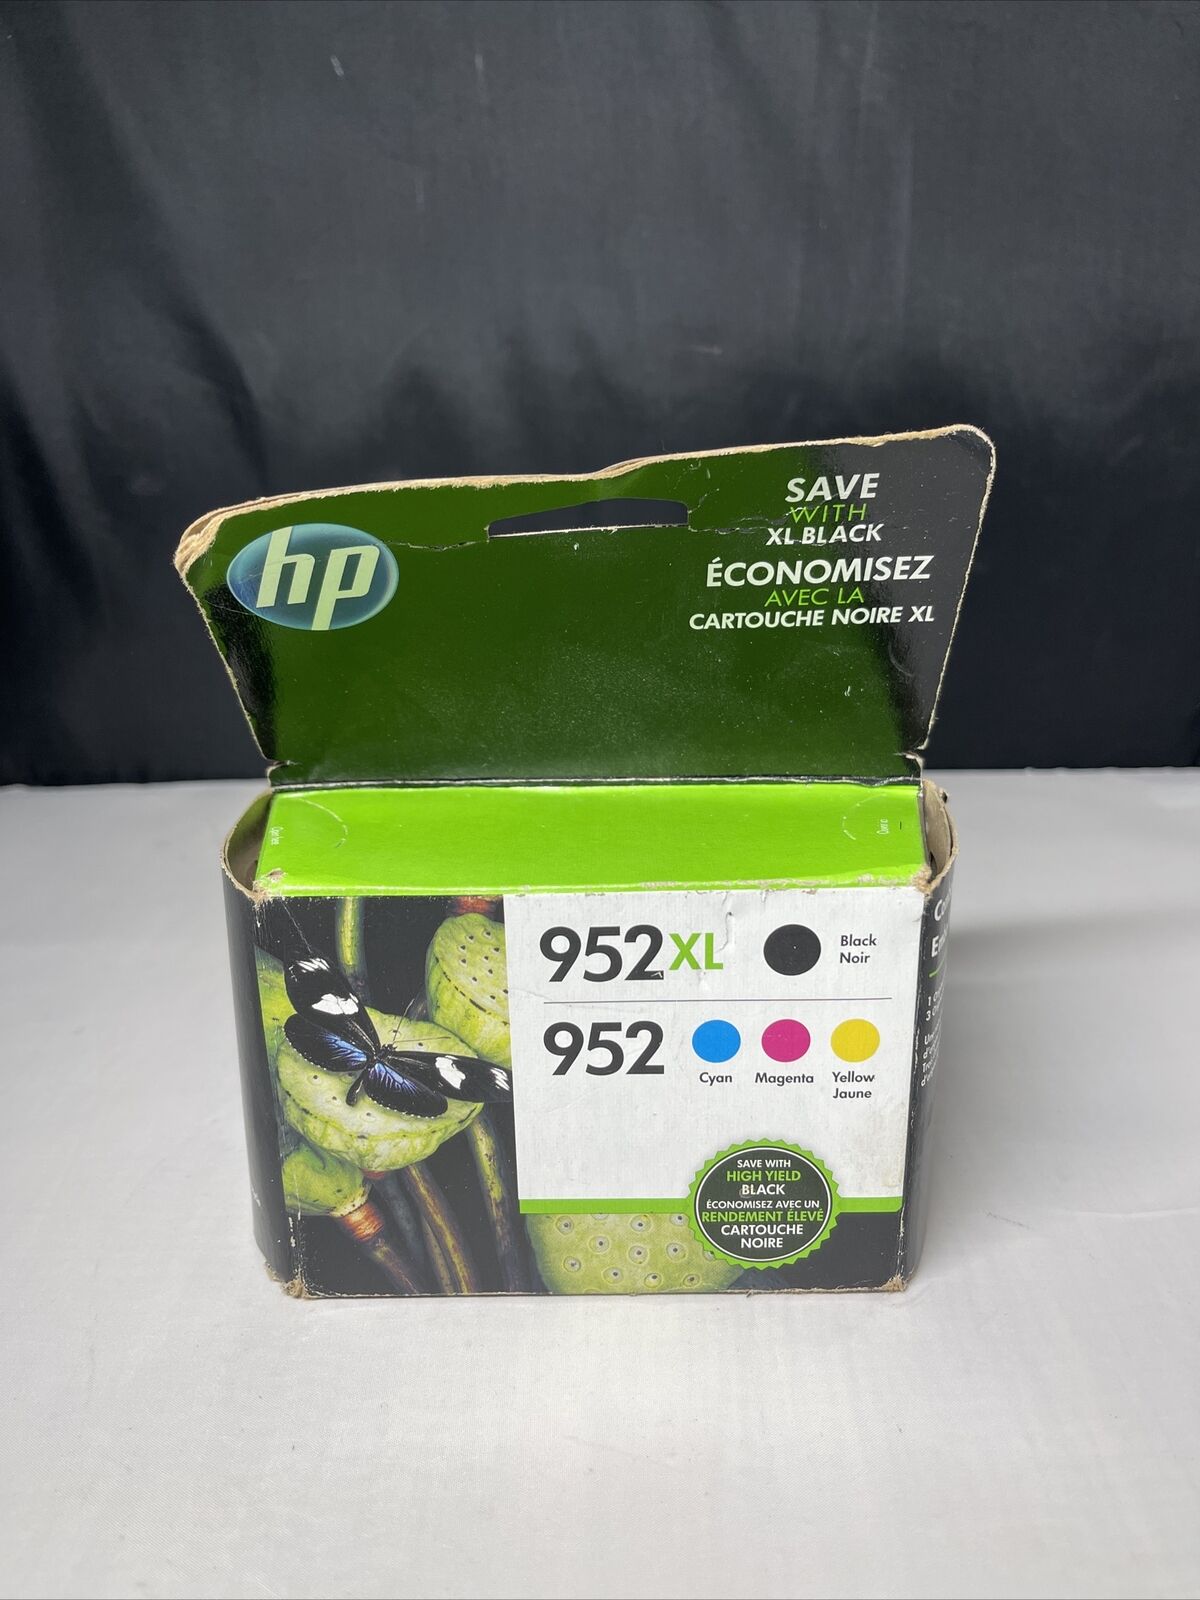 HP 952XL/952 Multi-Color Ink Cartridge Set Retail Box EXPIRED 11/2020